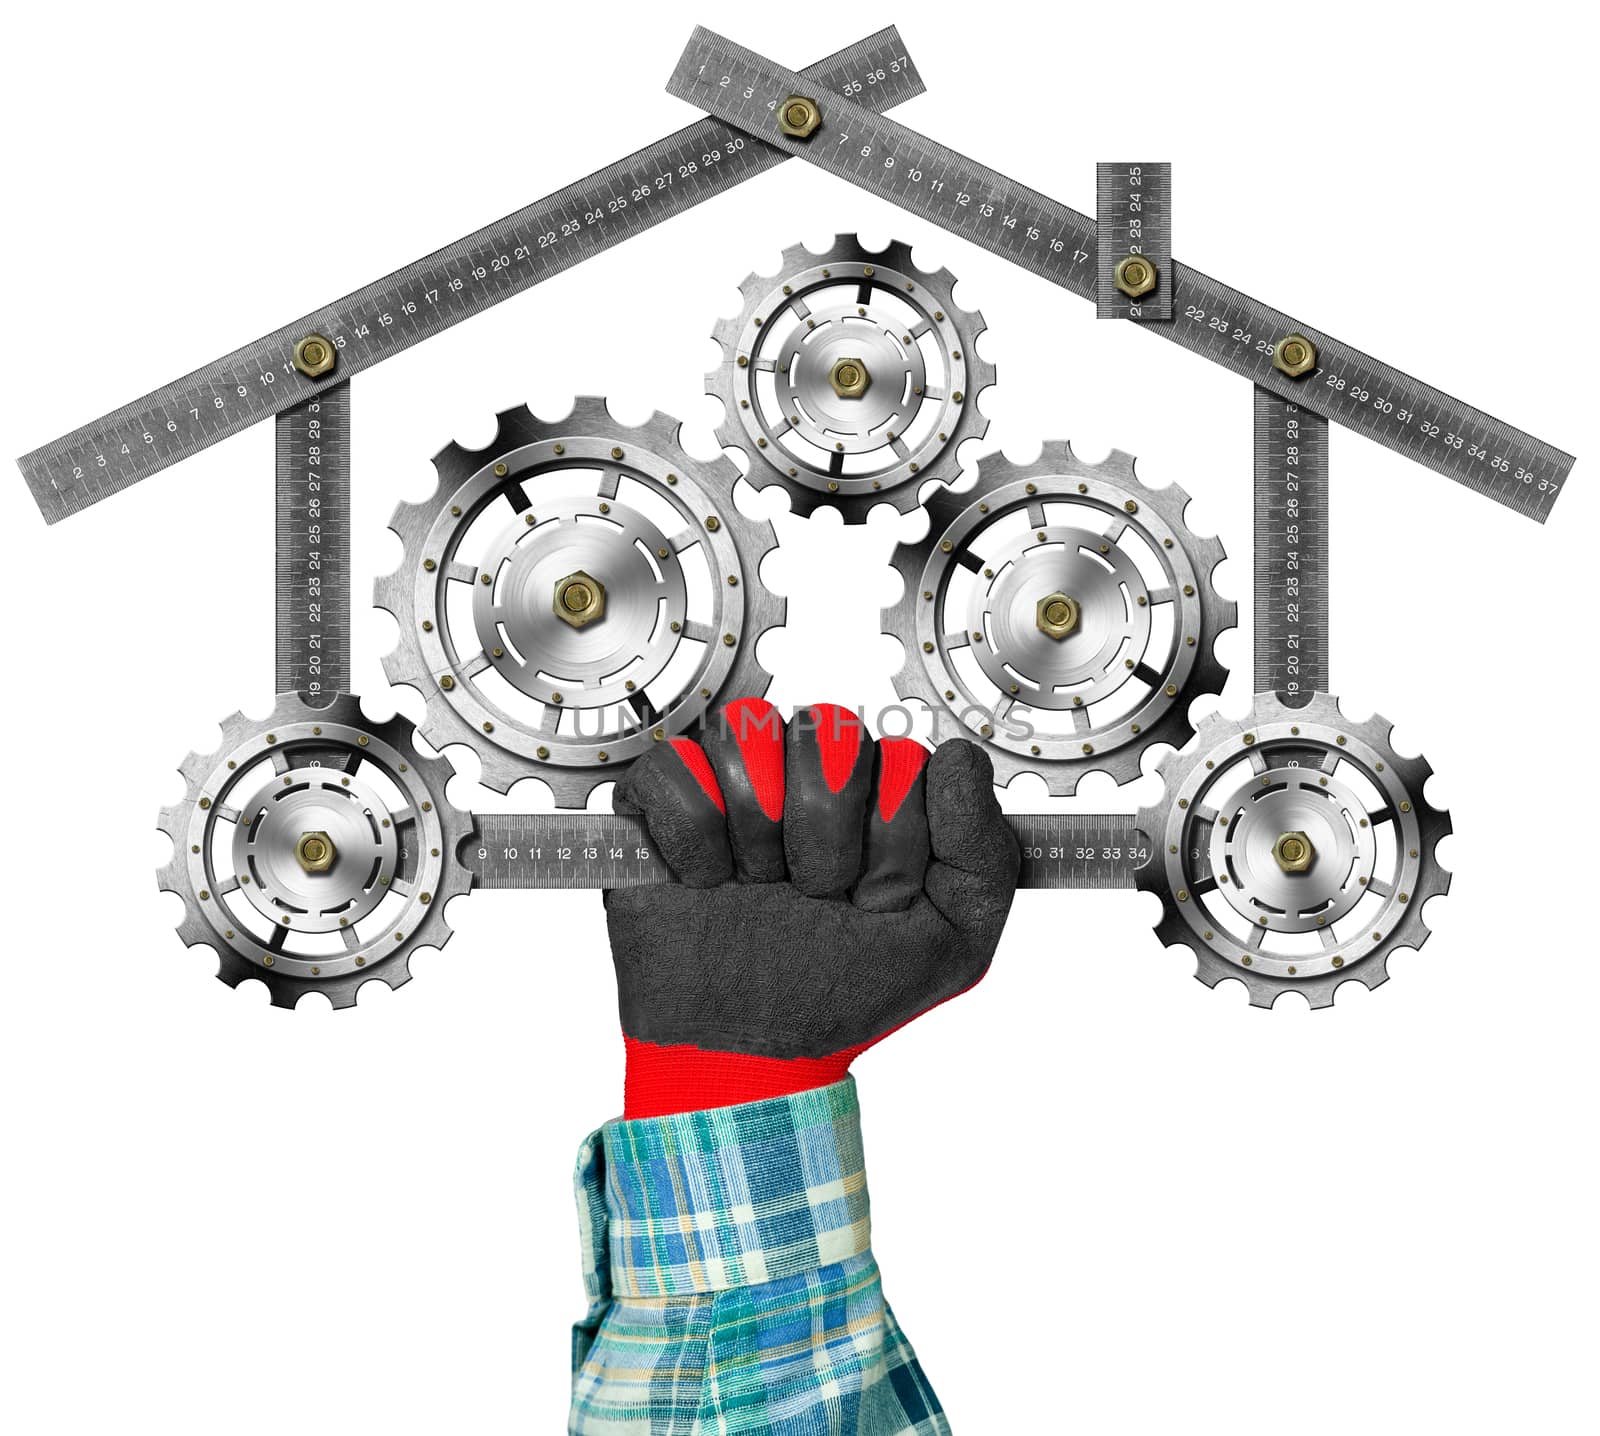 Hand with work glove holding a metal meter ruler in the shape of house with gears, symbol of house industry. Isolated on a white background